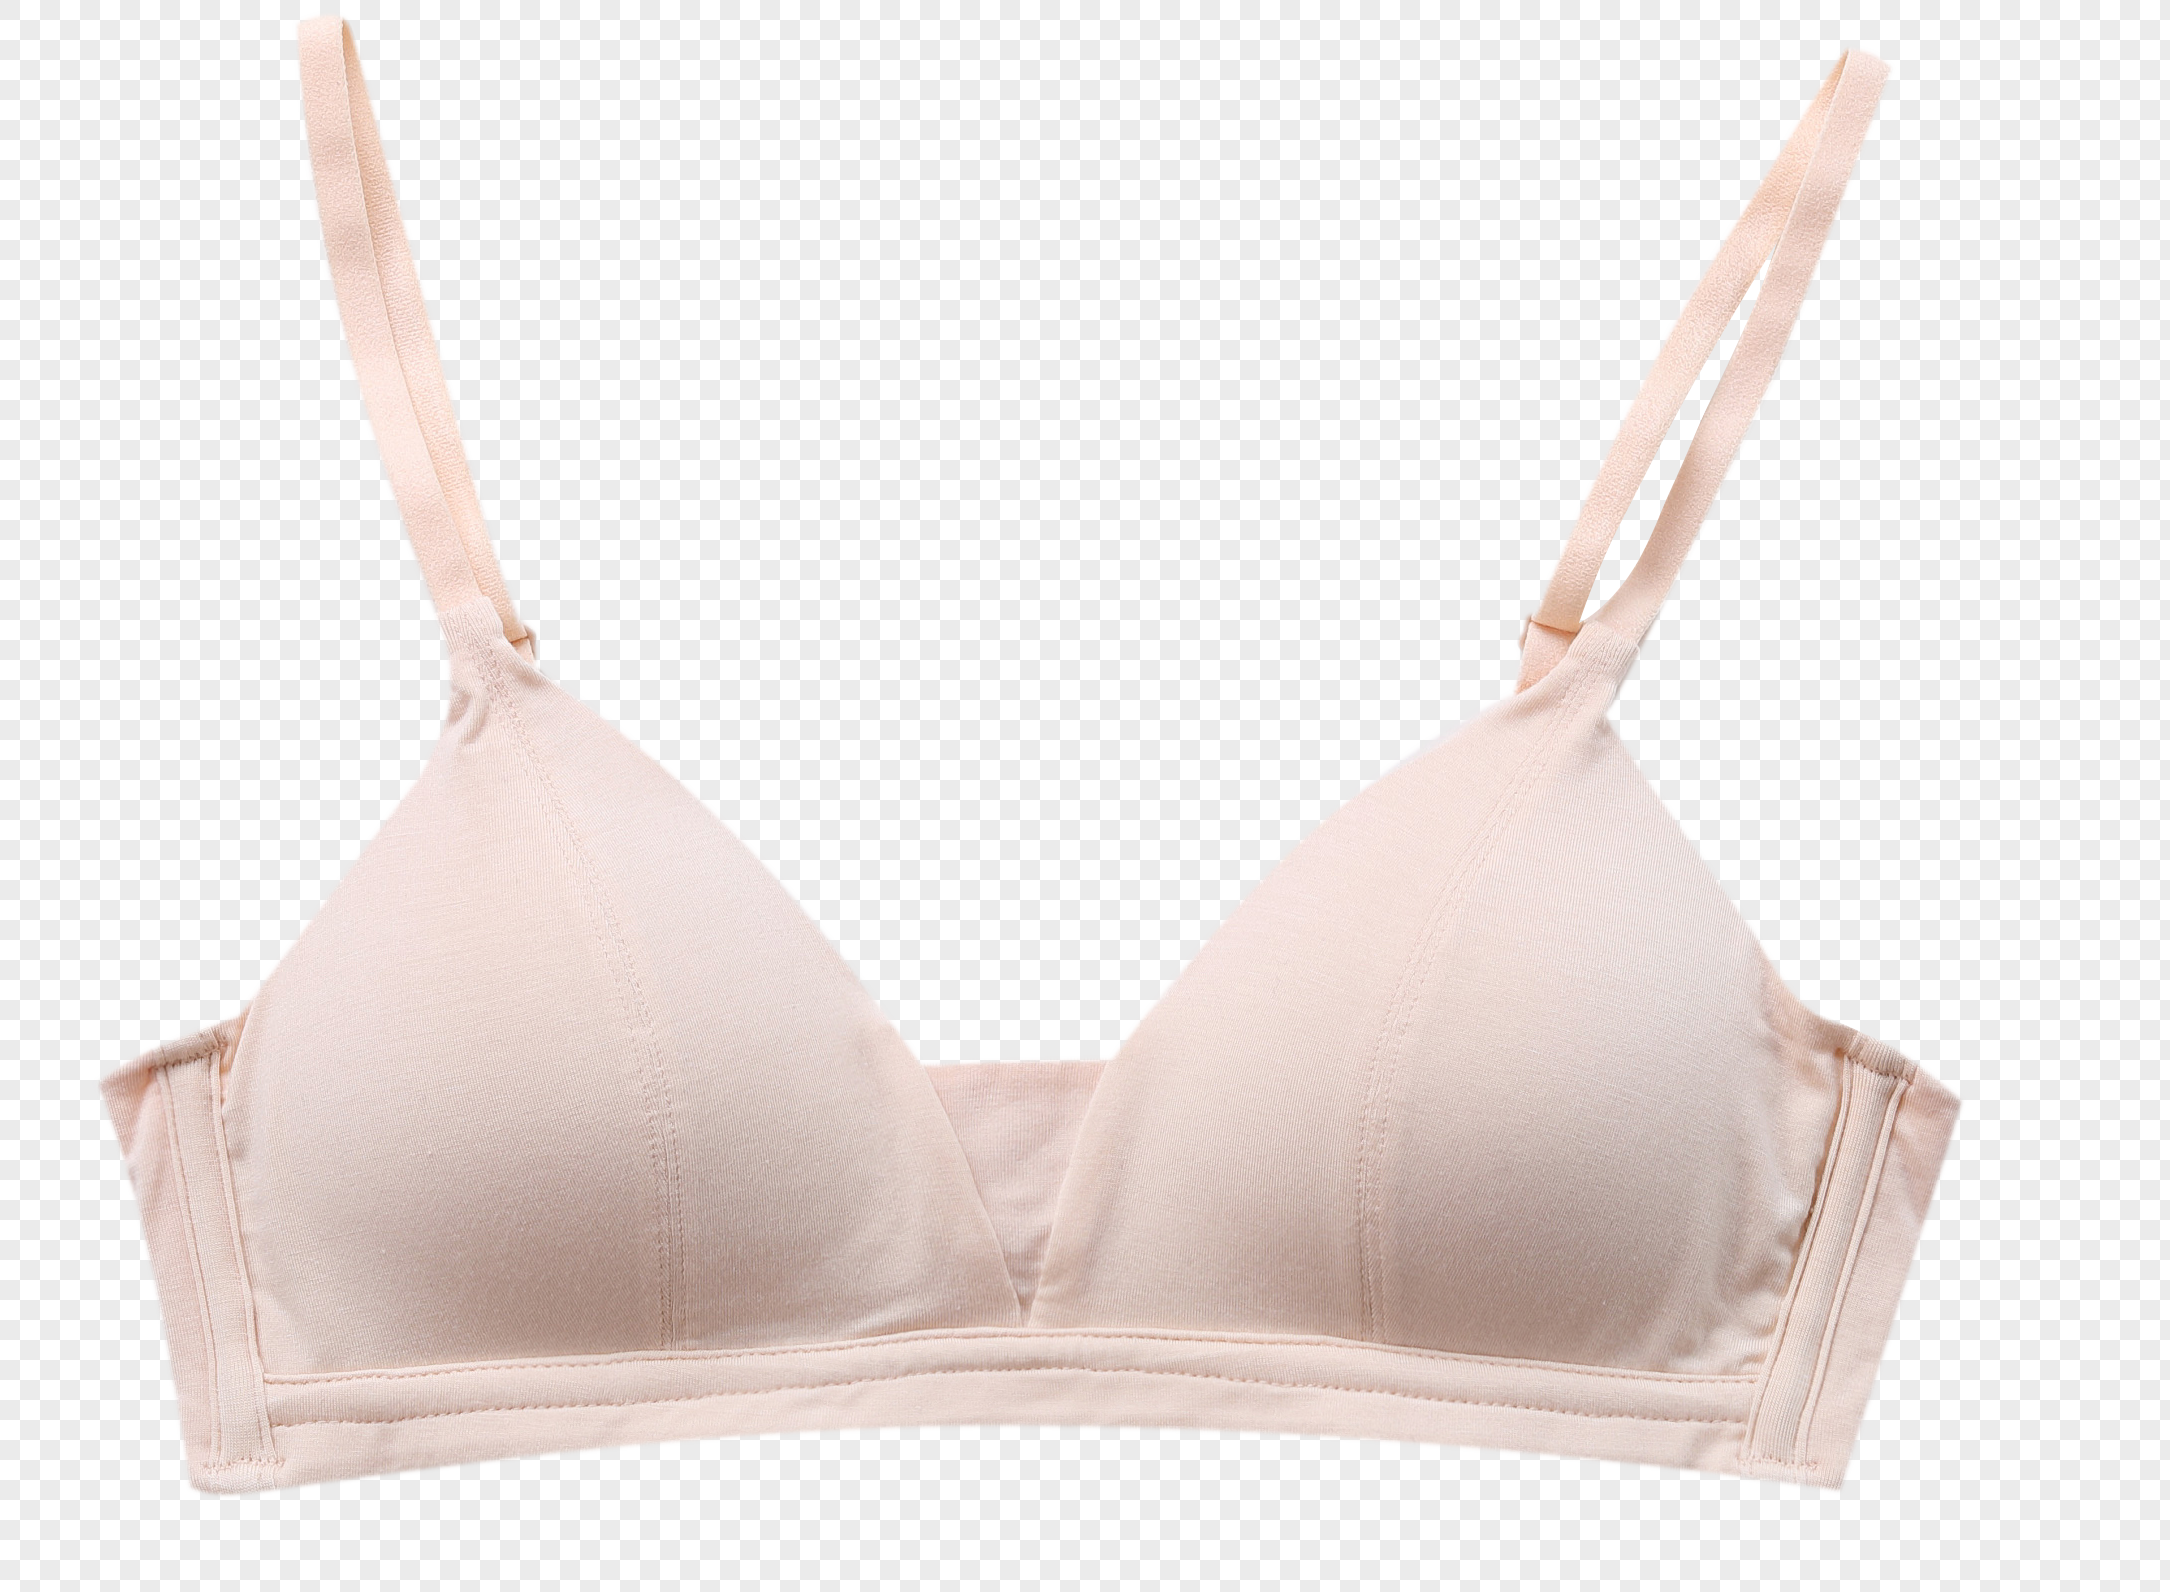 Lingerie Shoot PNG Images With Transparent Background